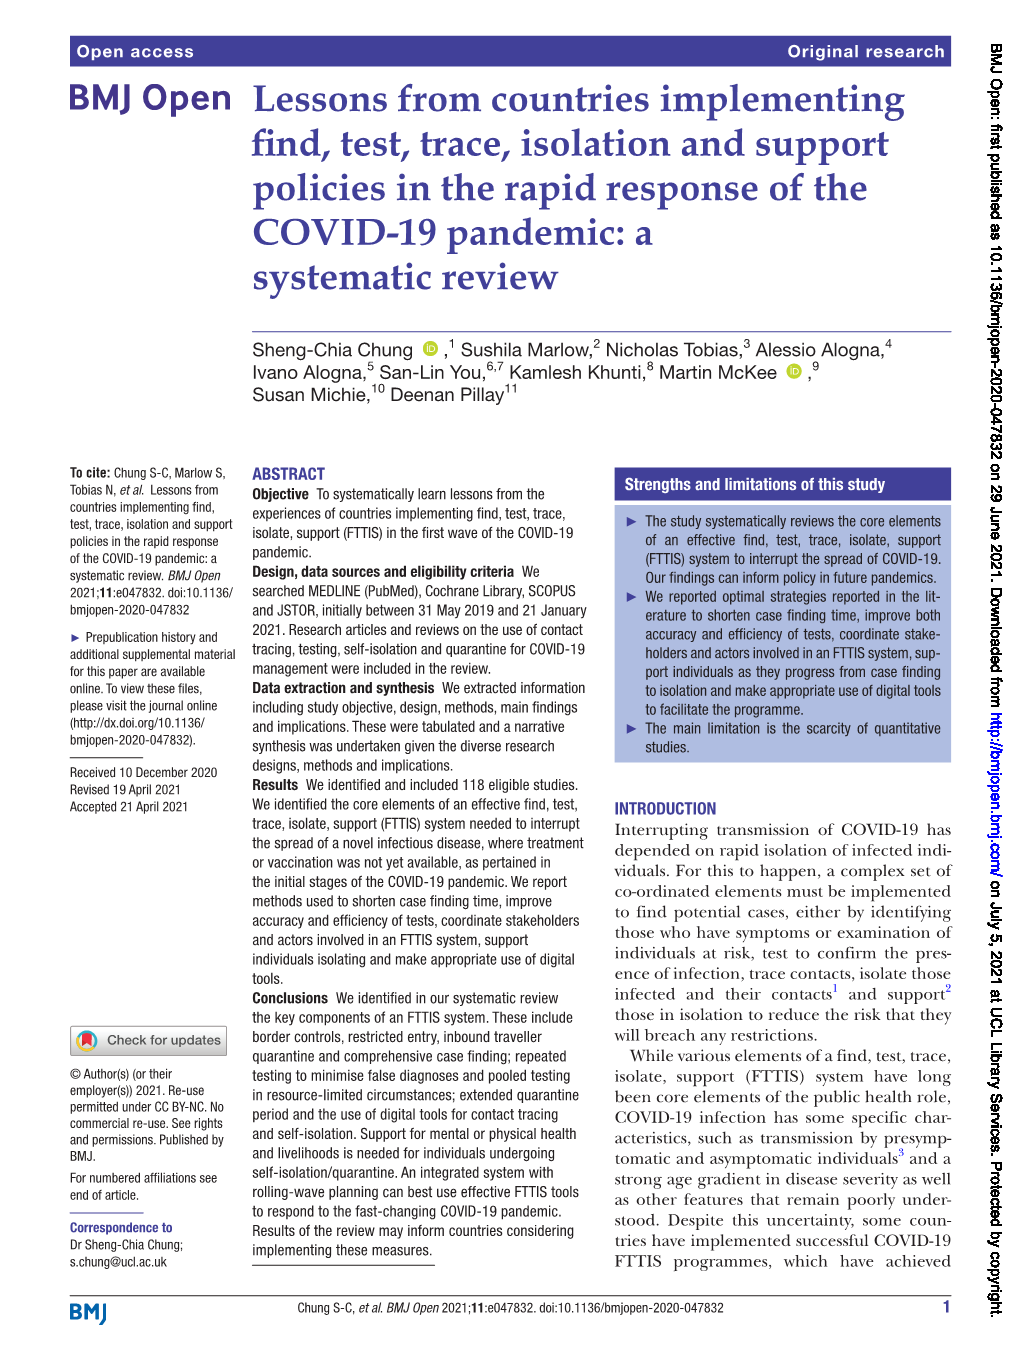 Lessons from Countries Implementing Find, Test, Trace, Isolation and Support Policies in the Rapid Response of the COVID-19 Pandemic: a Systematic Review